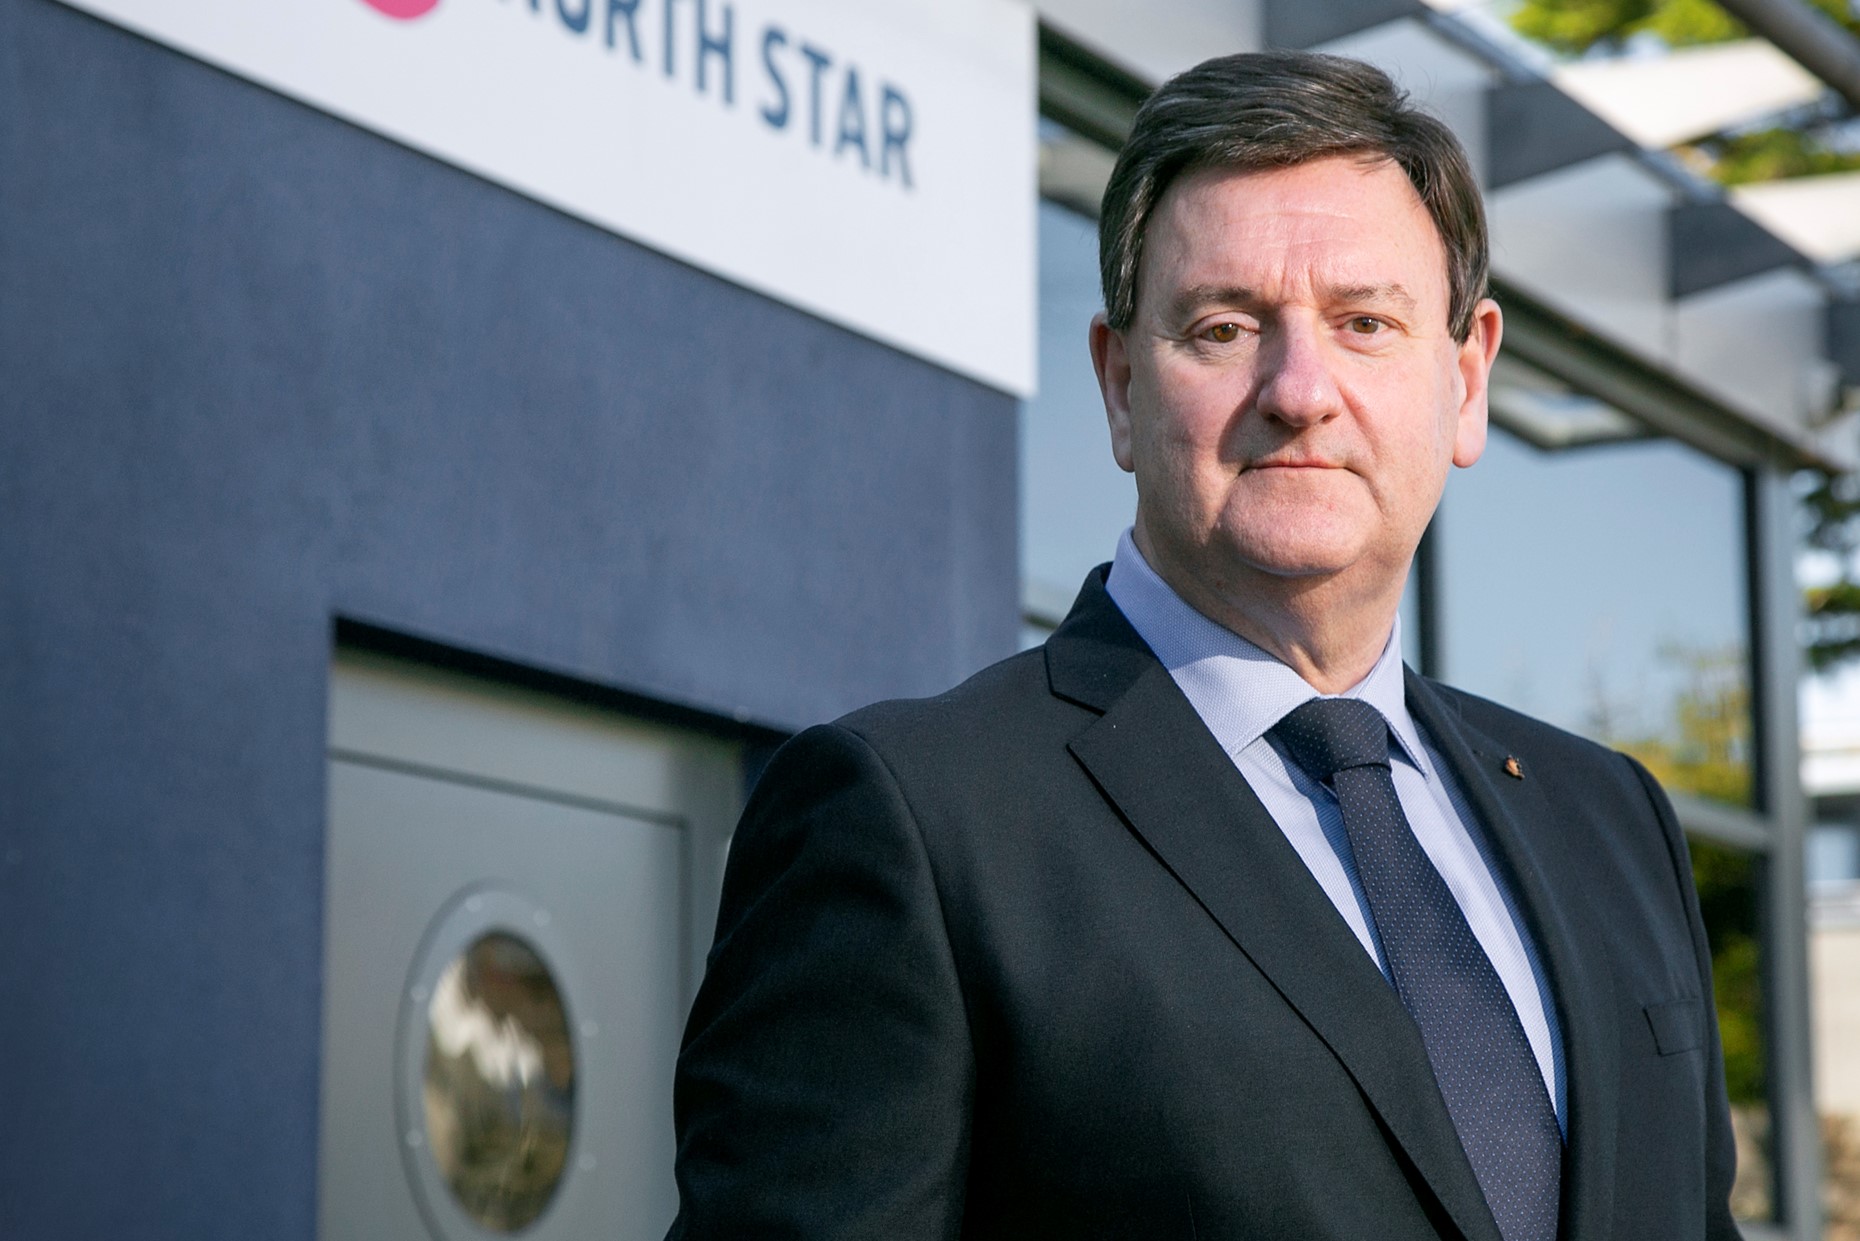 MEMBER NEWS: North Star announces James Bradford as chief technology officer